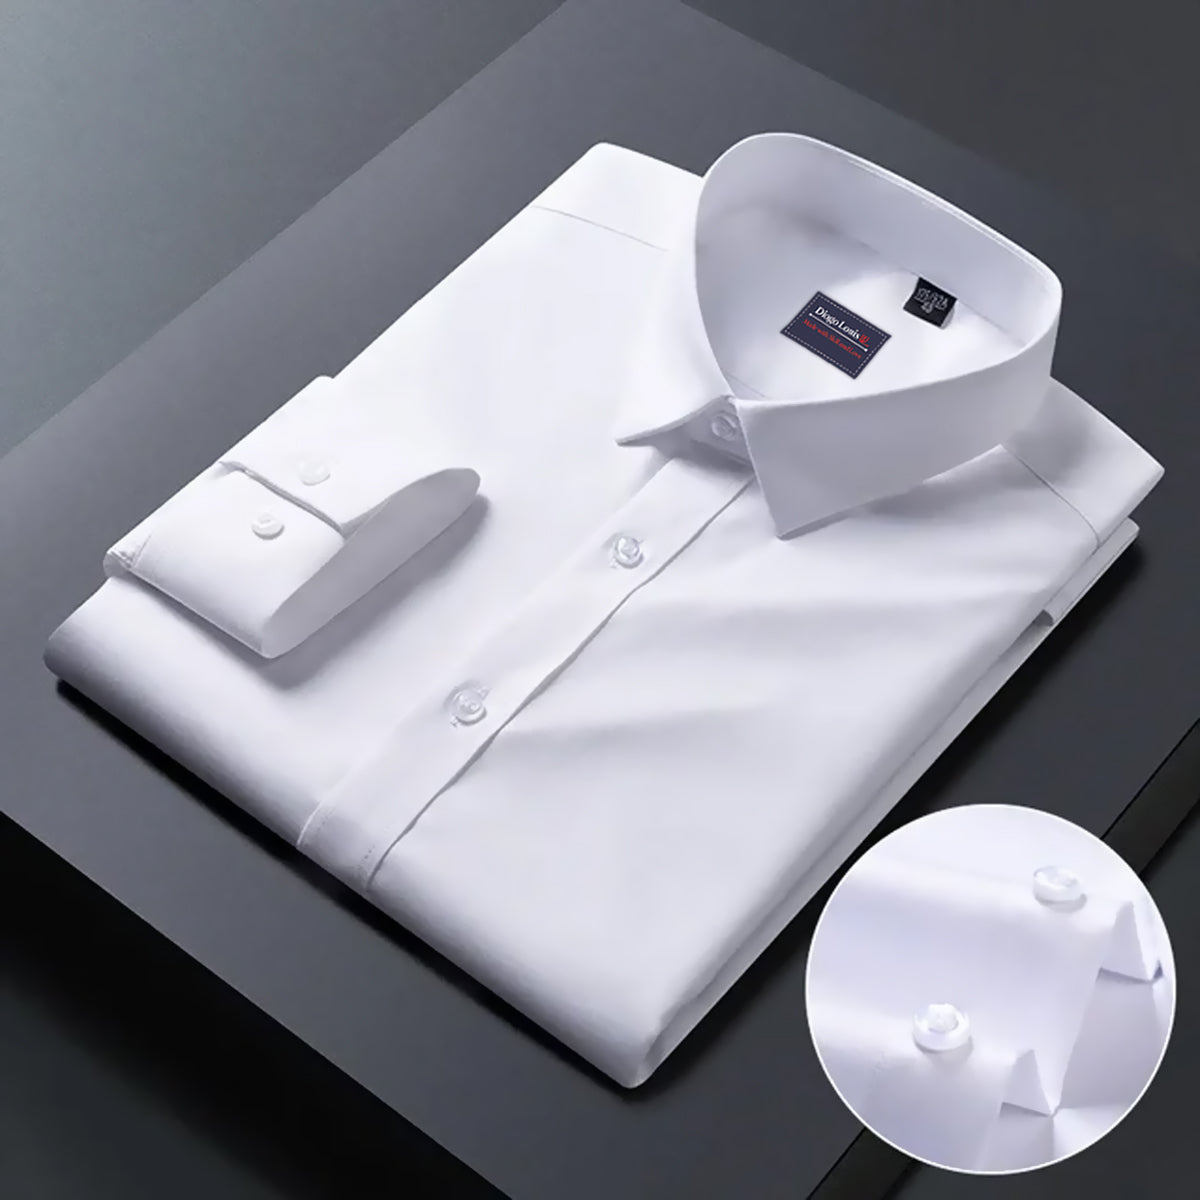 white solid casual shirt